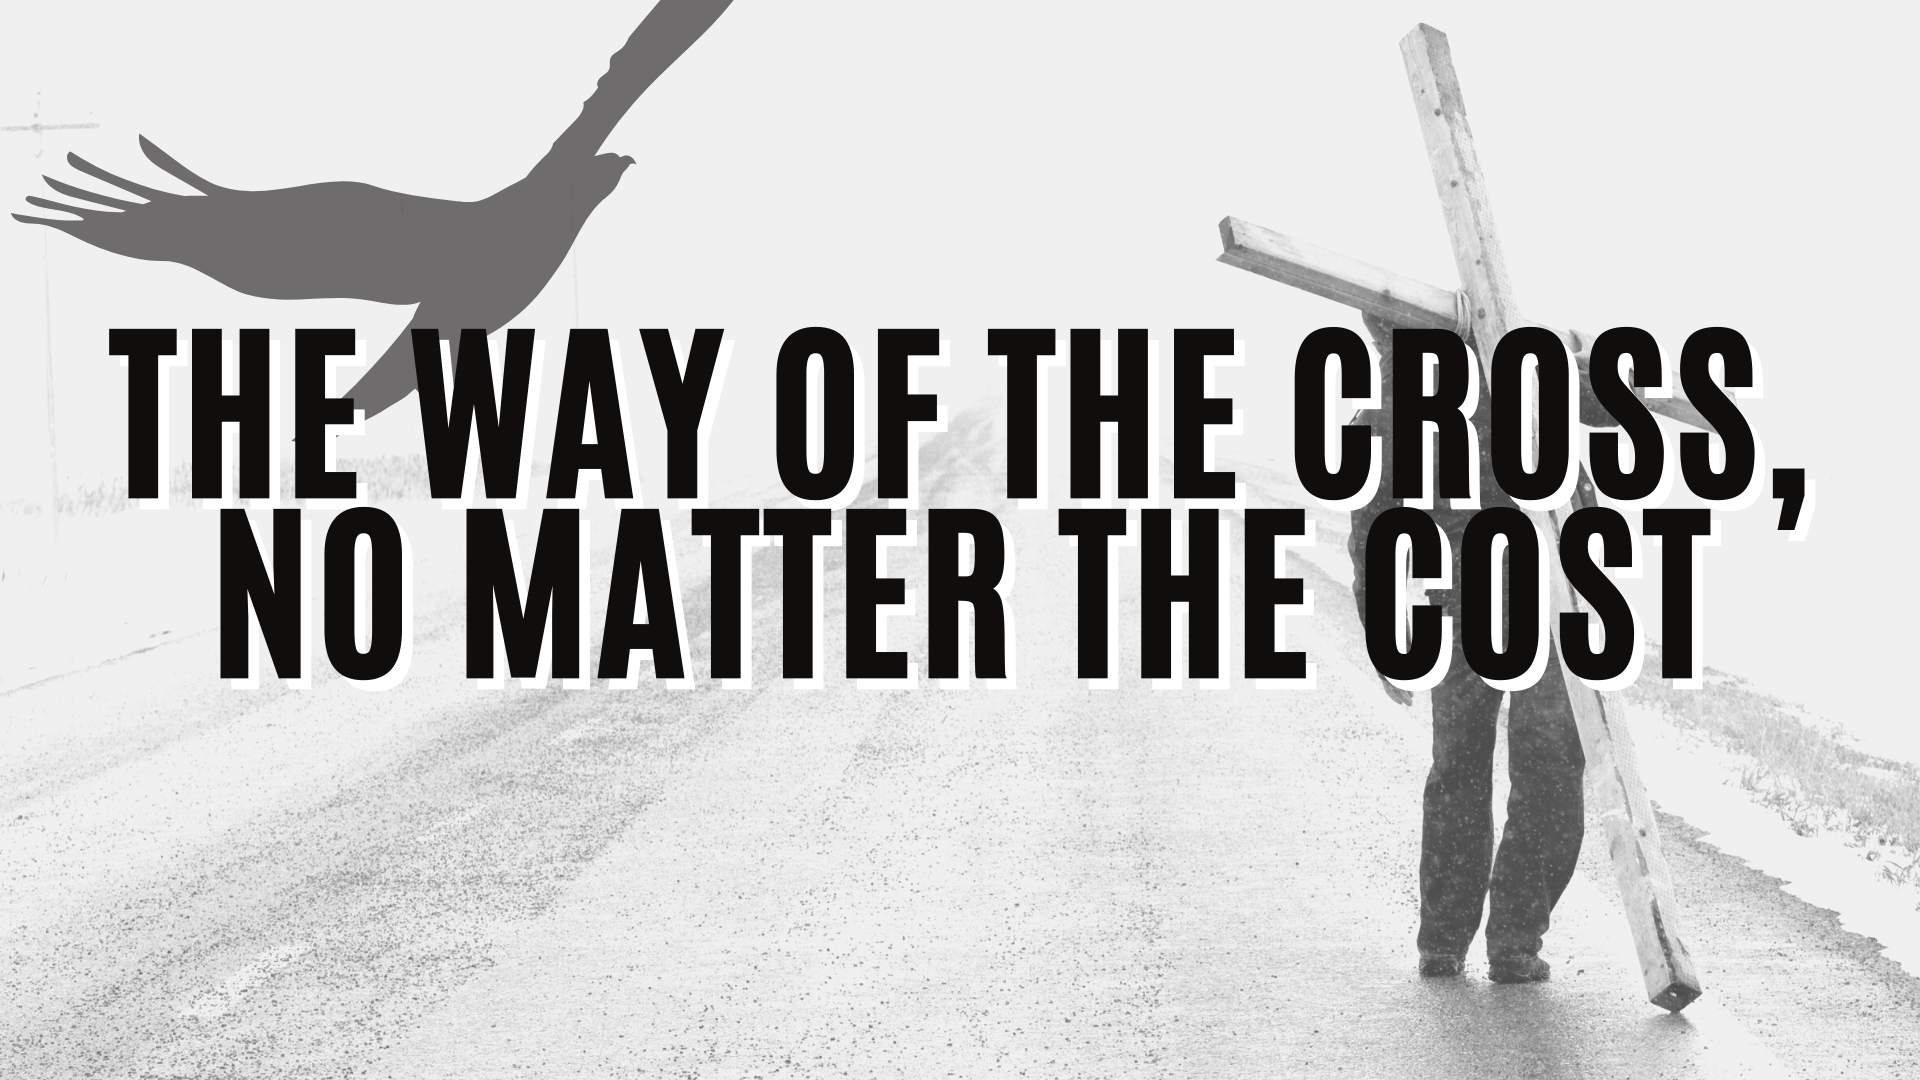 The way of the cross, no matter the cost